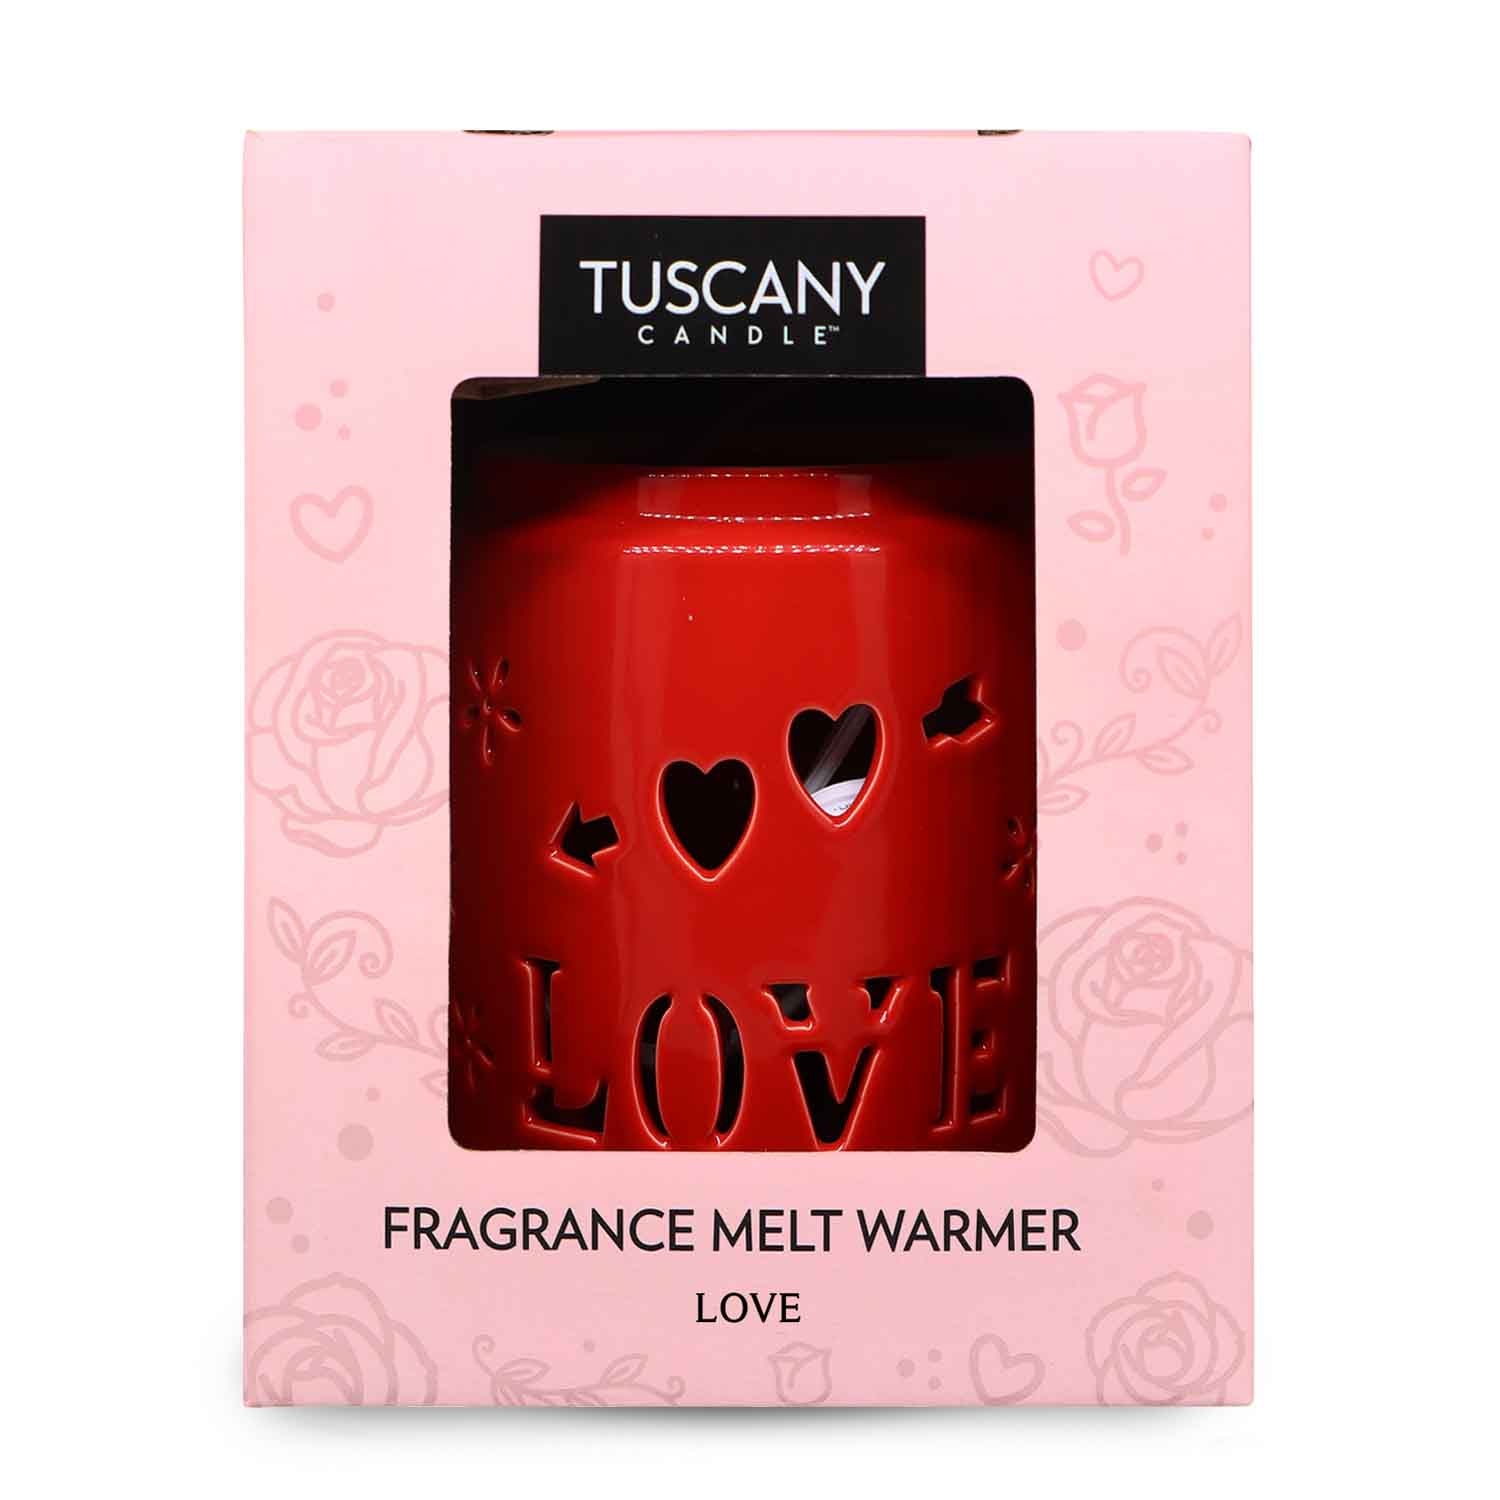 The Love Wax Melt Warmer by Tuscany Candle® SEASONAL is perfect for creating a cozy ambiance in your home. With the ability to melt wax melts, this warmer fills the air with delightful fragrances from Tusc.